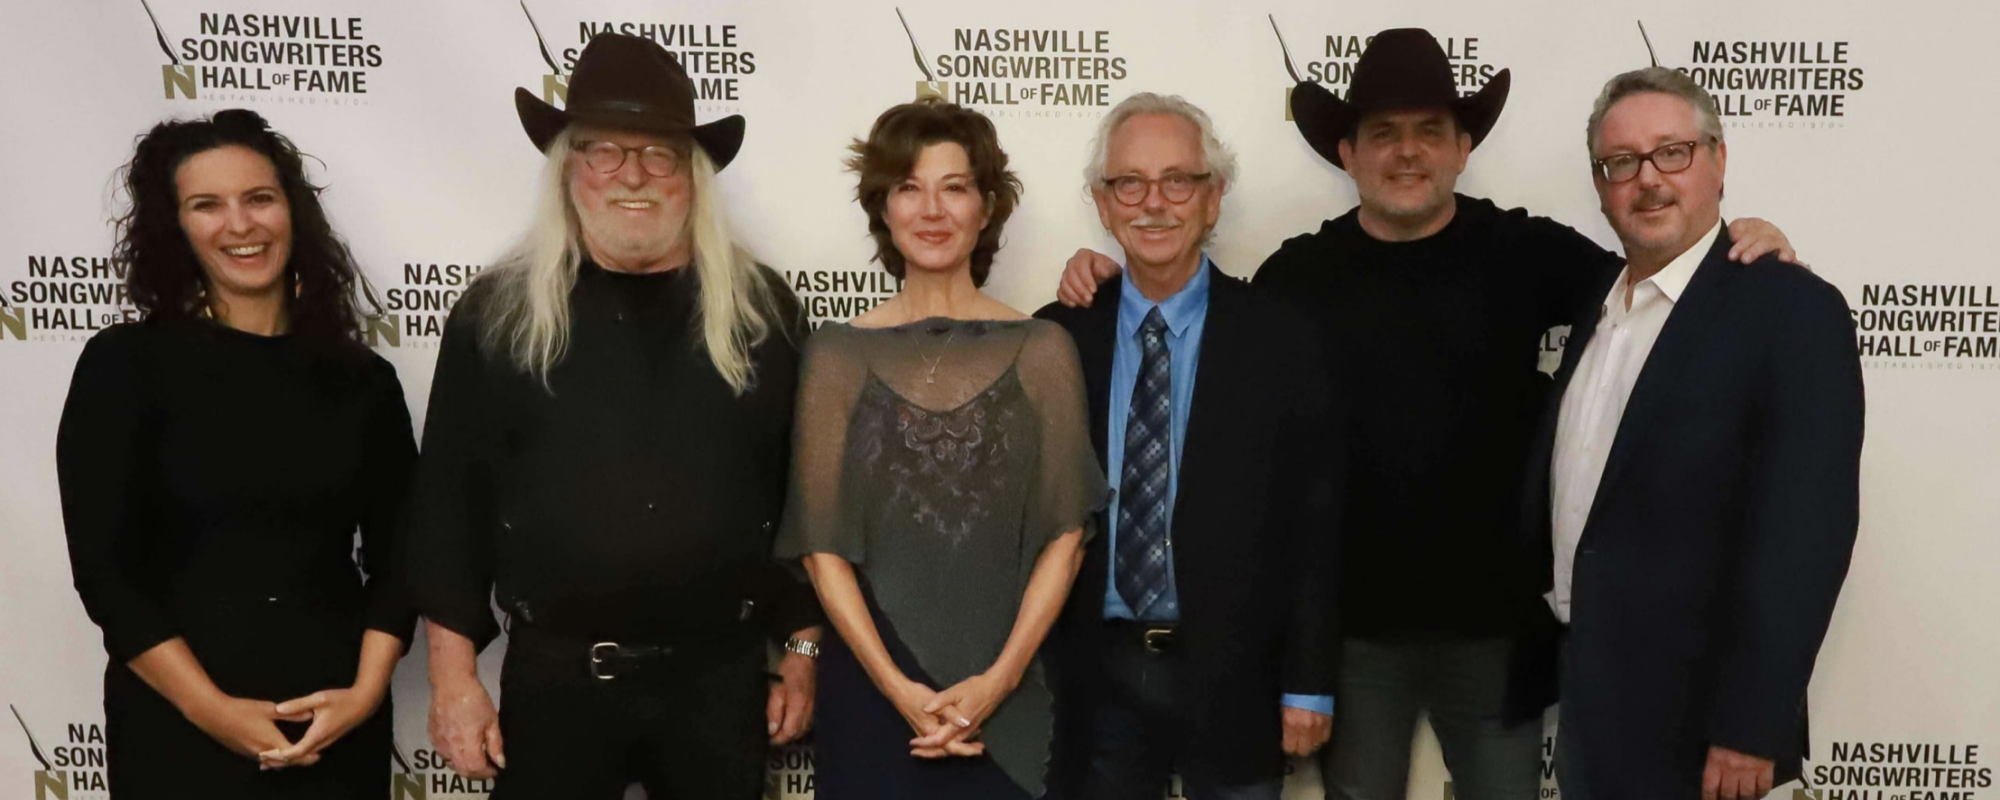 Nashville Songwriters Hall of Fame Announces Class of 2021 Inductees